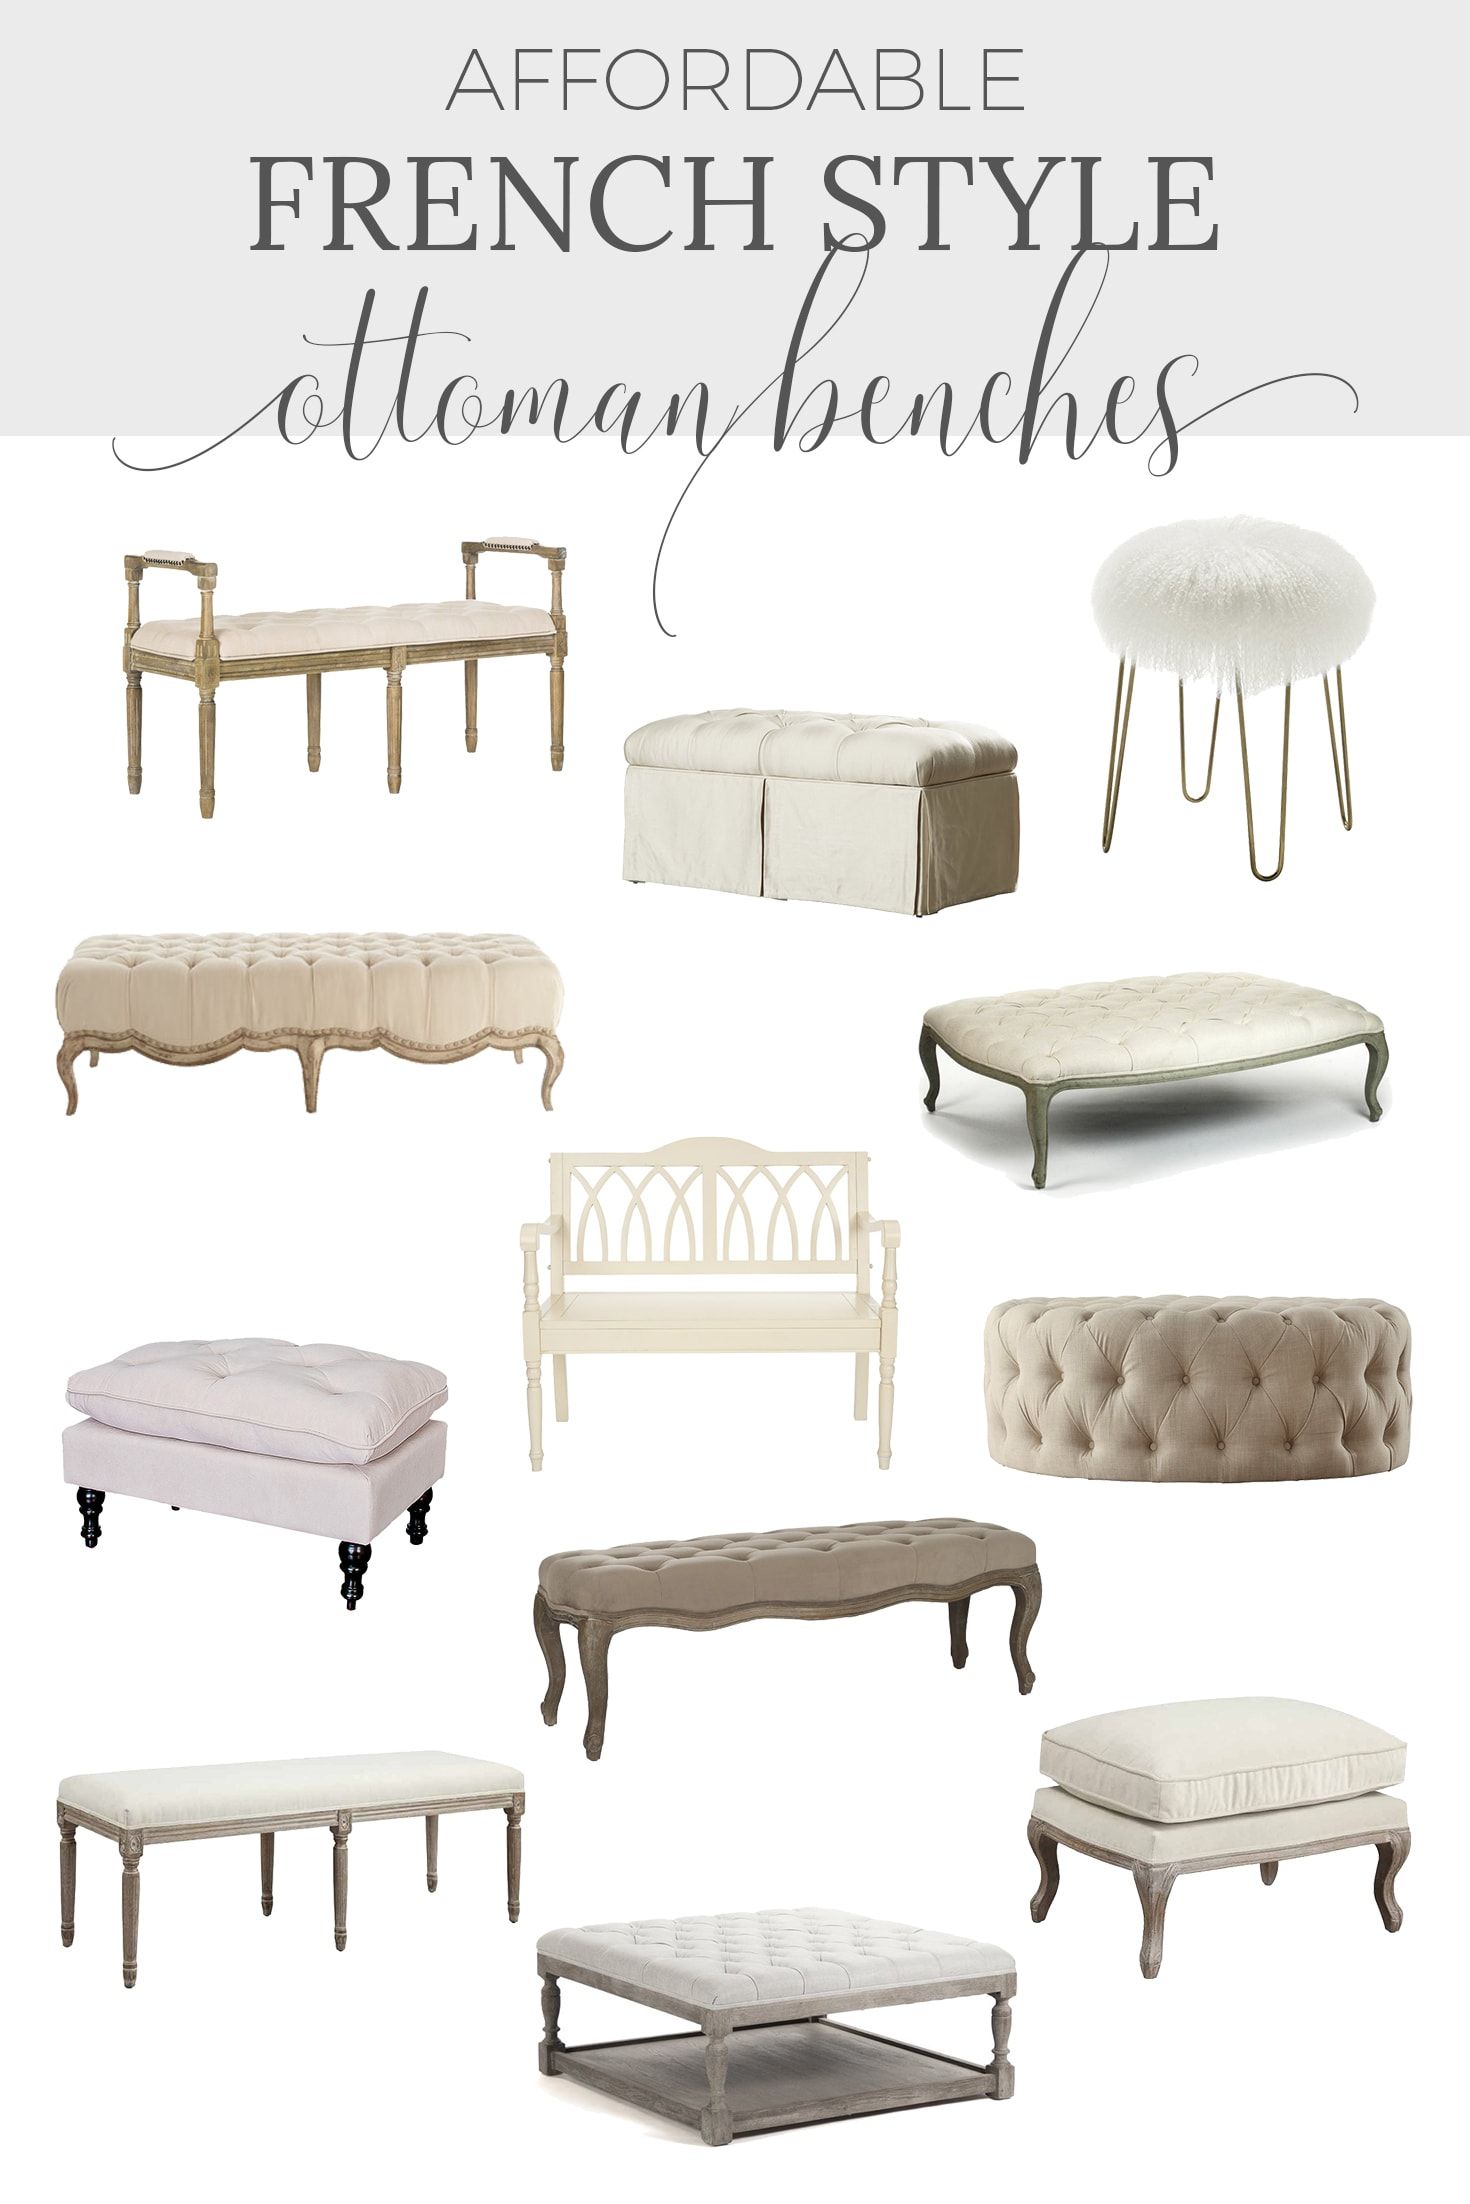 The Bedroom Bench: 20+ Affordable French Style Ottomans Intended For Bench Ottomans (View 7 of 15)